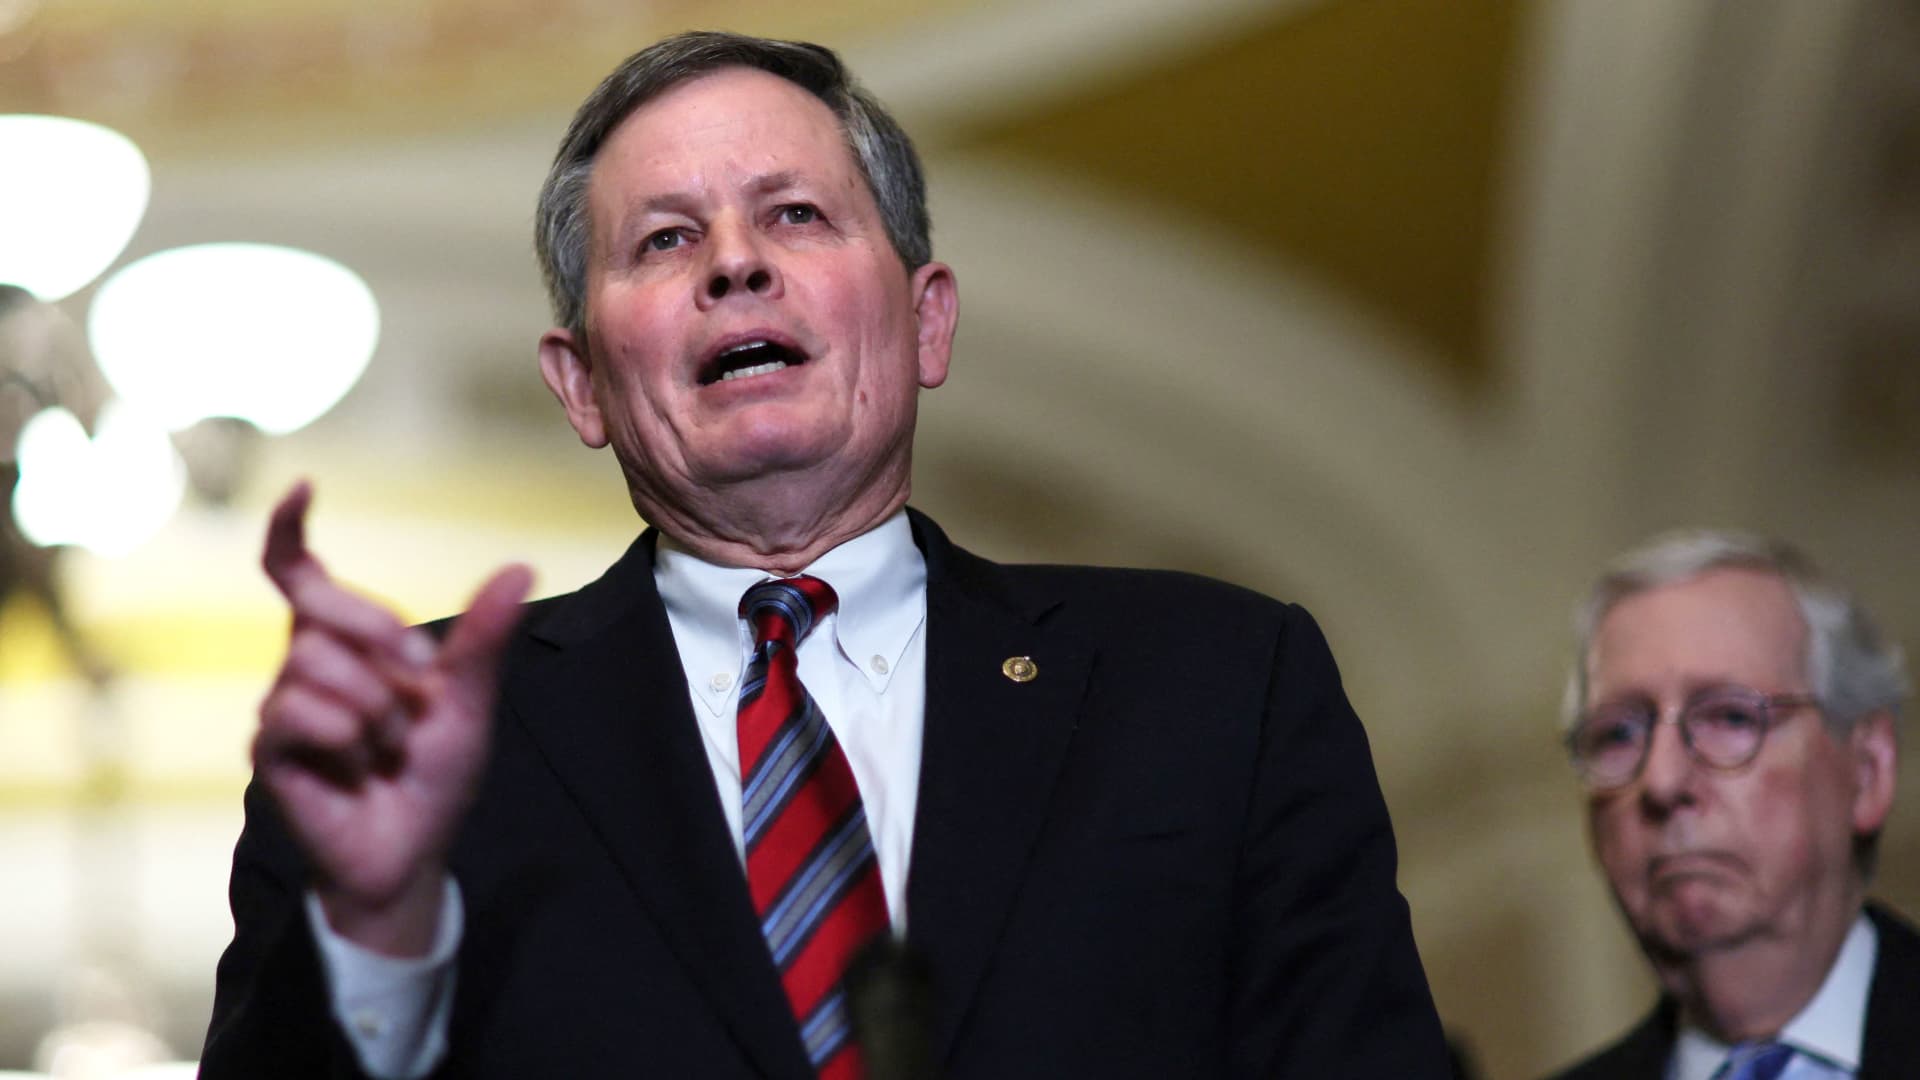 U.S. Sen. Steve Daines (R-MT) speaks along with other Republican Senate leadership at a weekly press conference in the U.S. Capitol building in Washington, January 31, 2023.